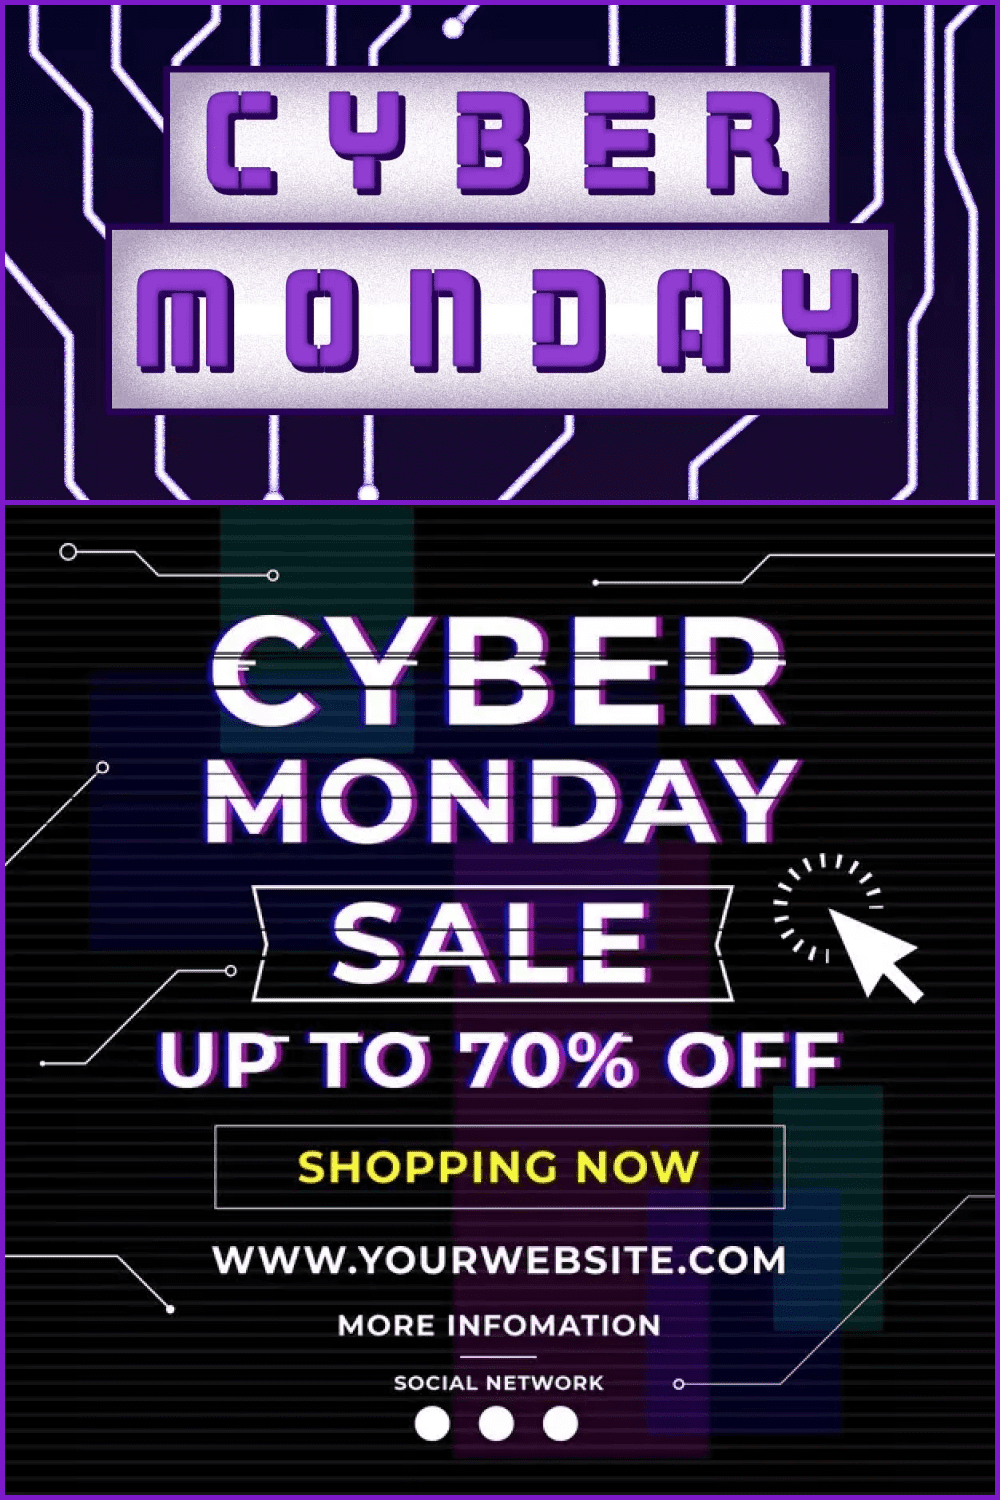 Flyer for Cyber Monday with large white text on a blue background.